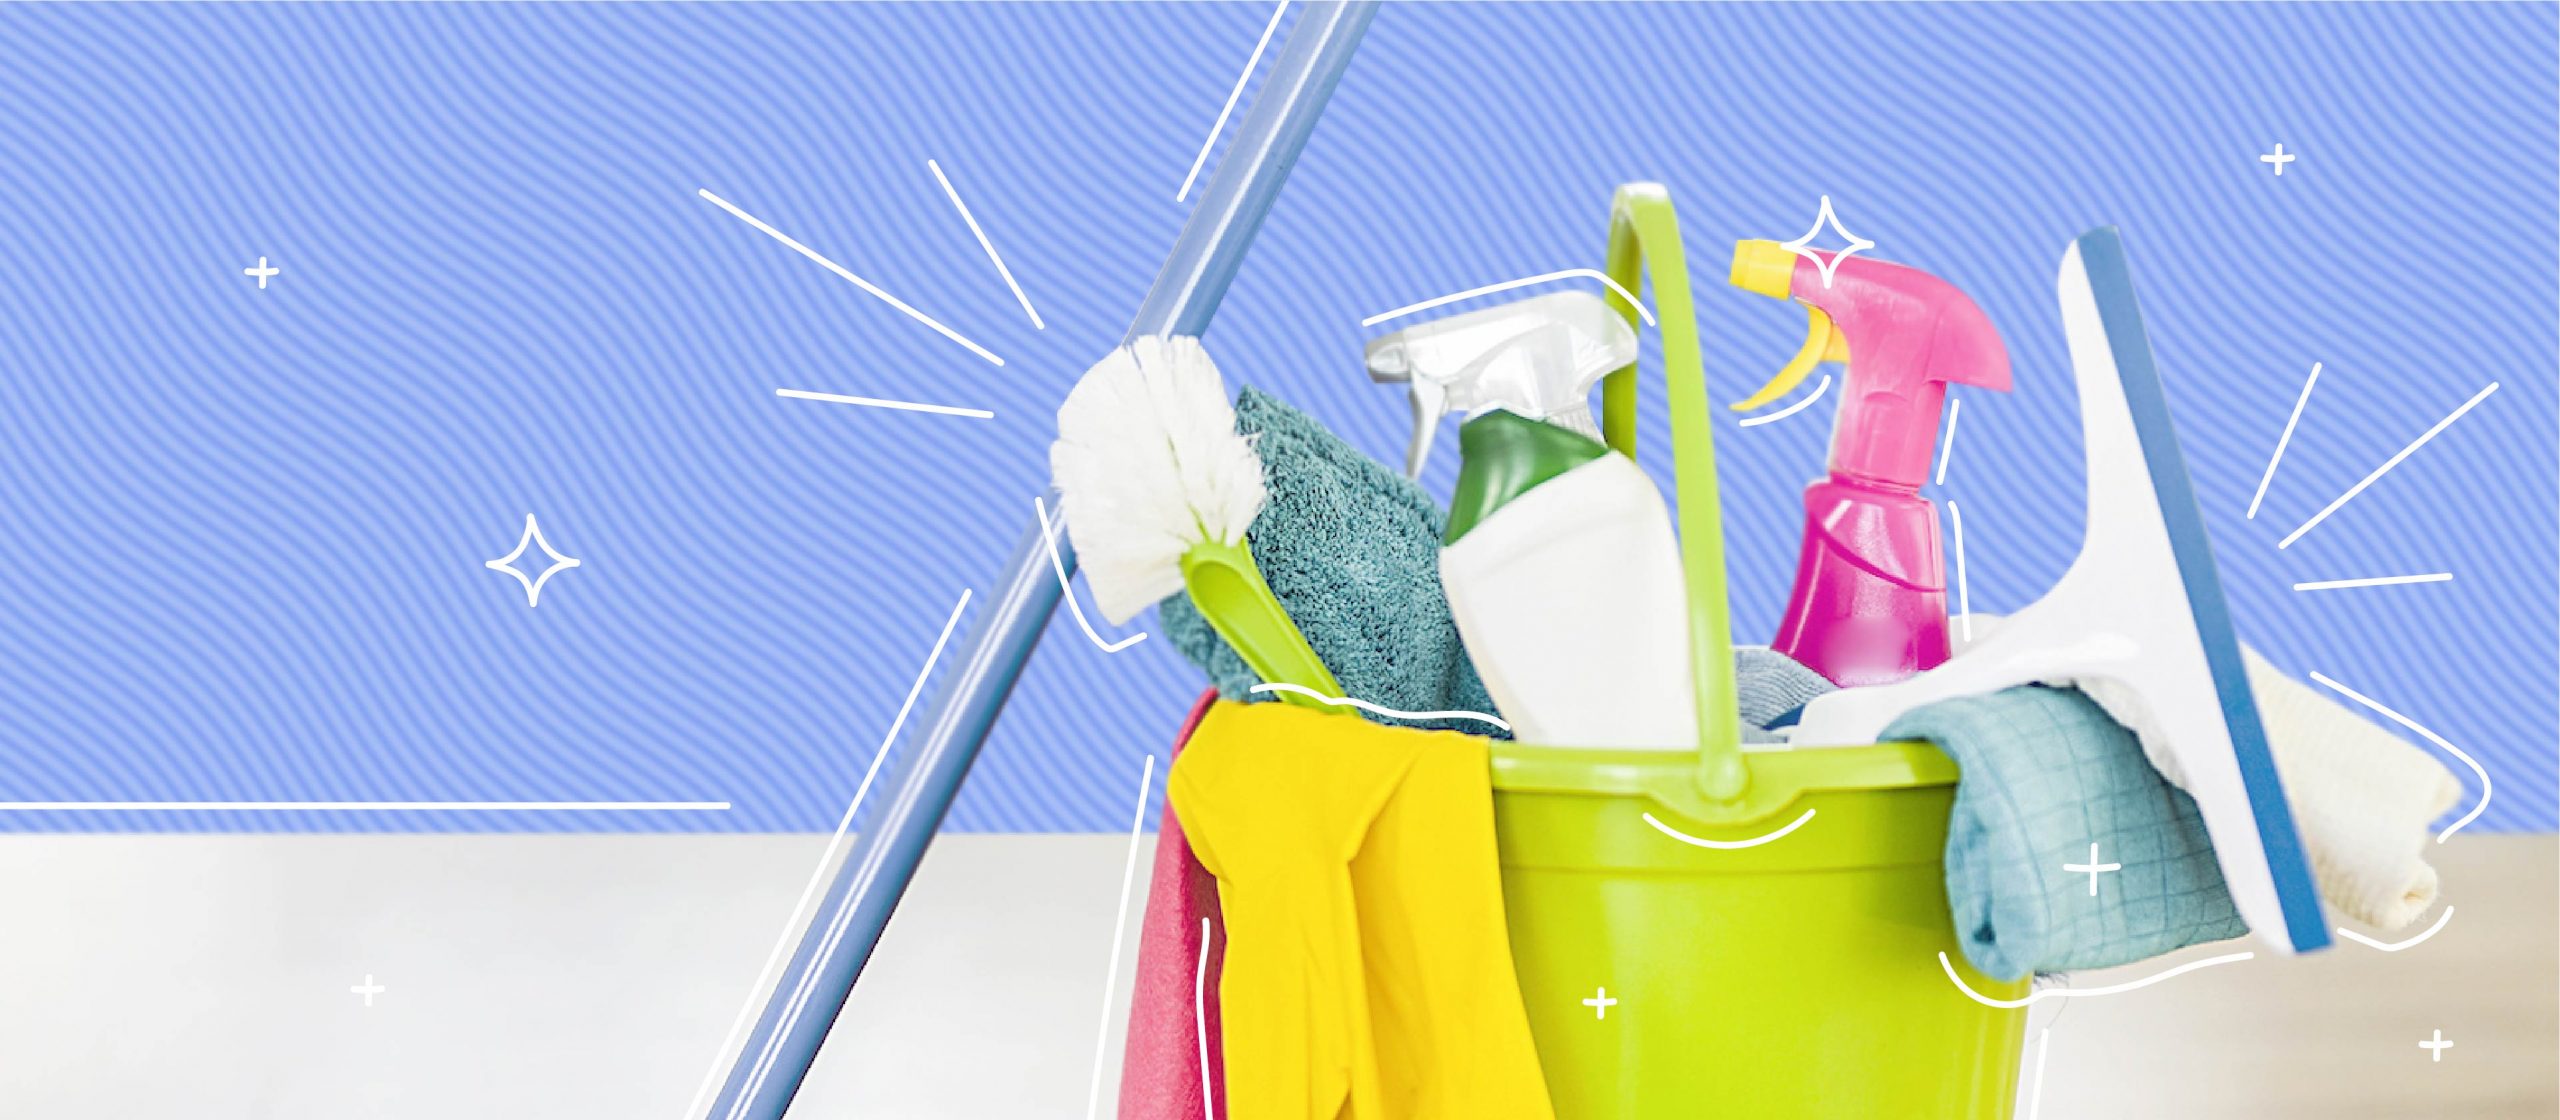 cleaning supplies for home